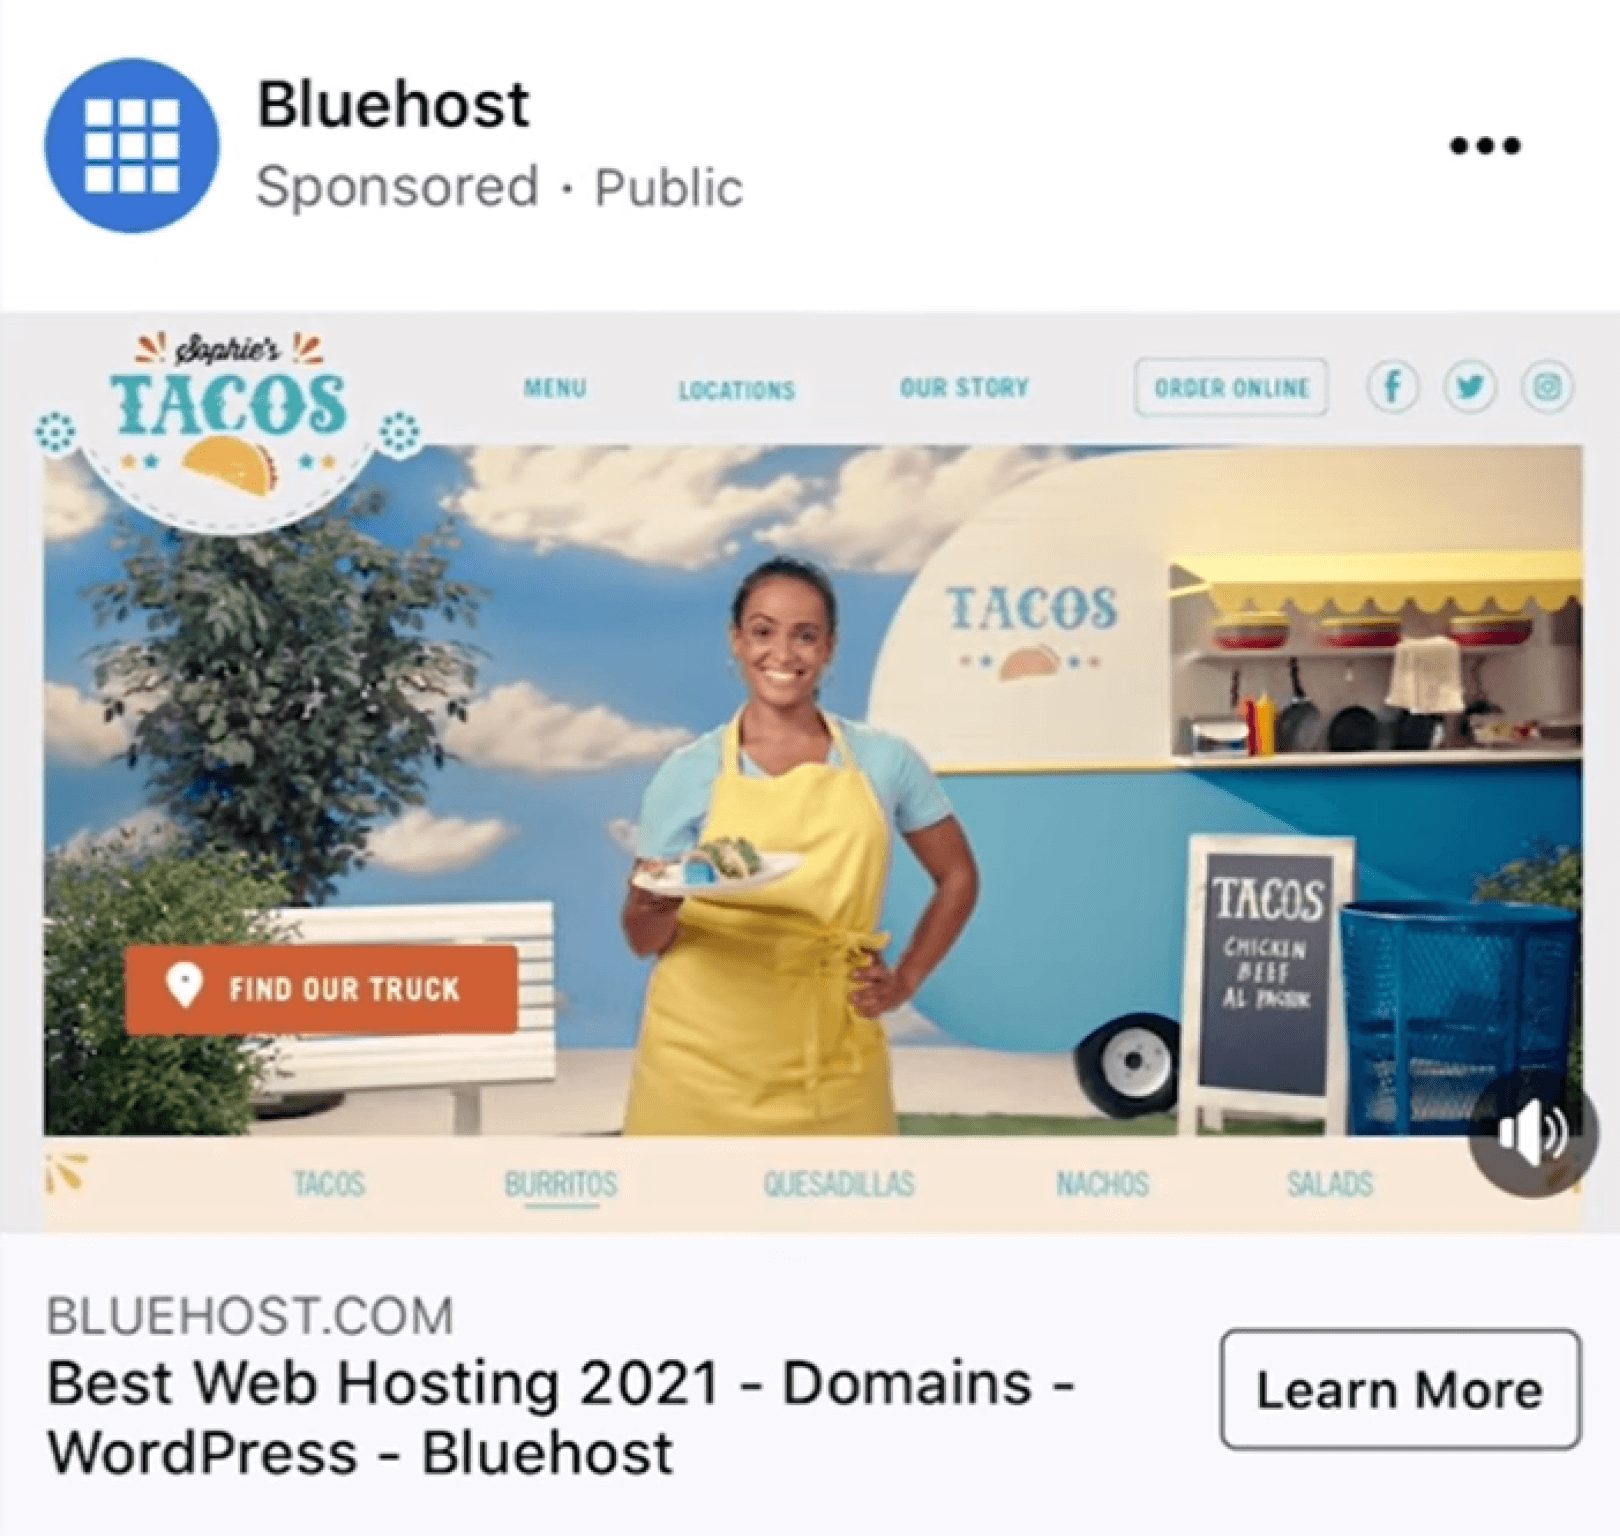 Bluehost's Campaign to Promote Its New Services